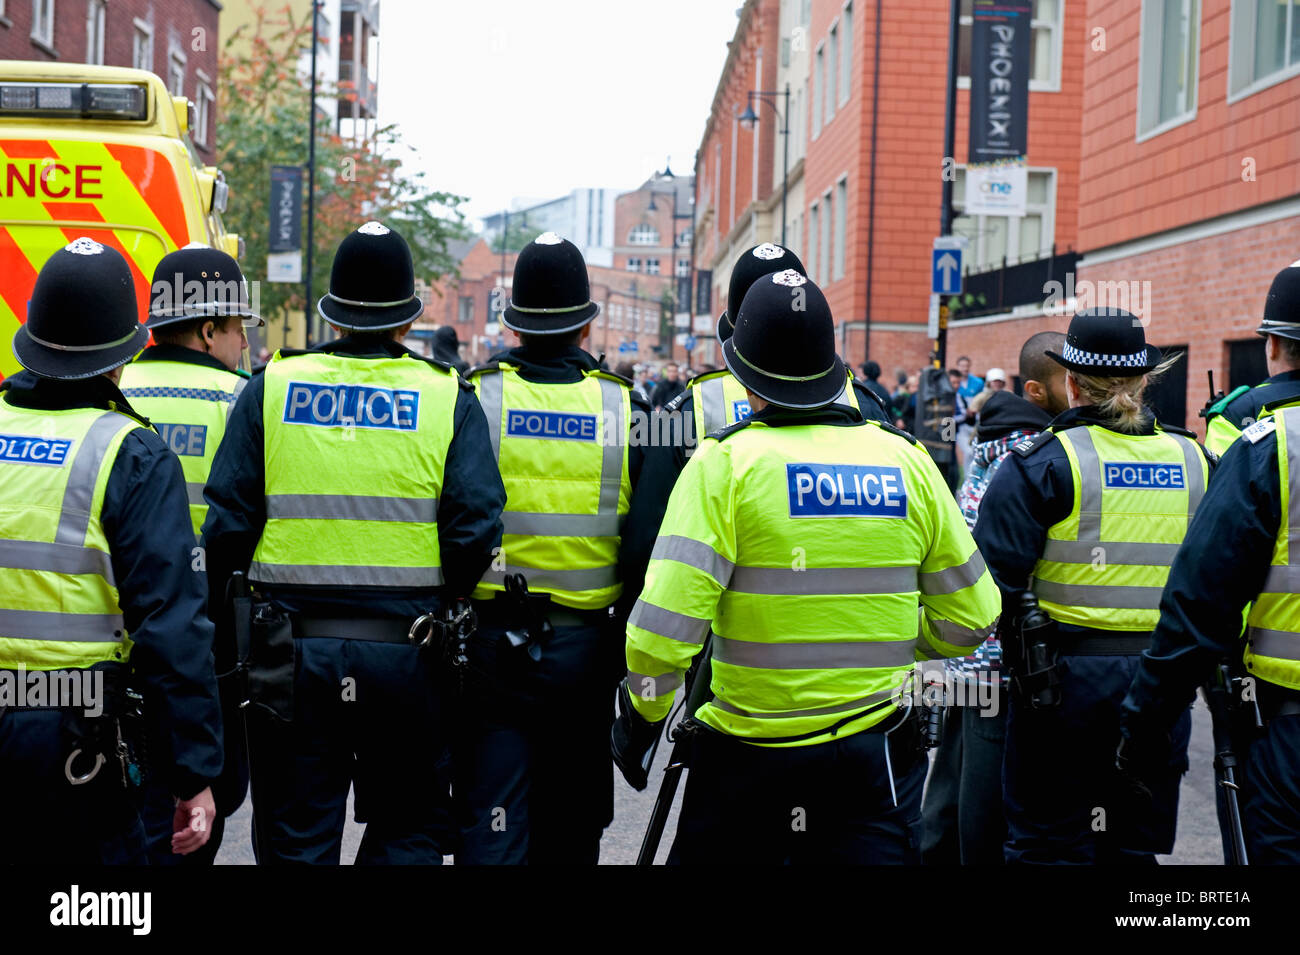 Policing The English Defence League demonstration in Leicester. 9th October 2010. Stock Photo